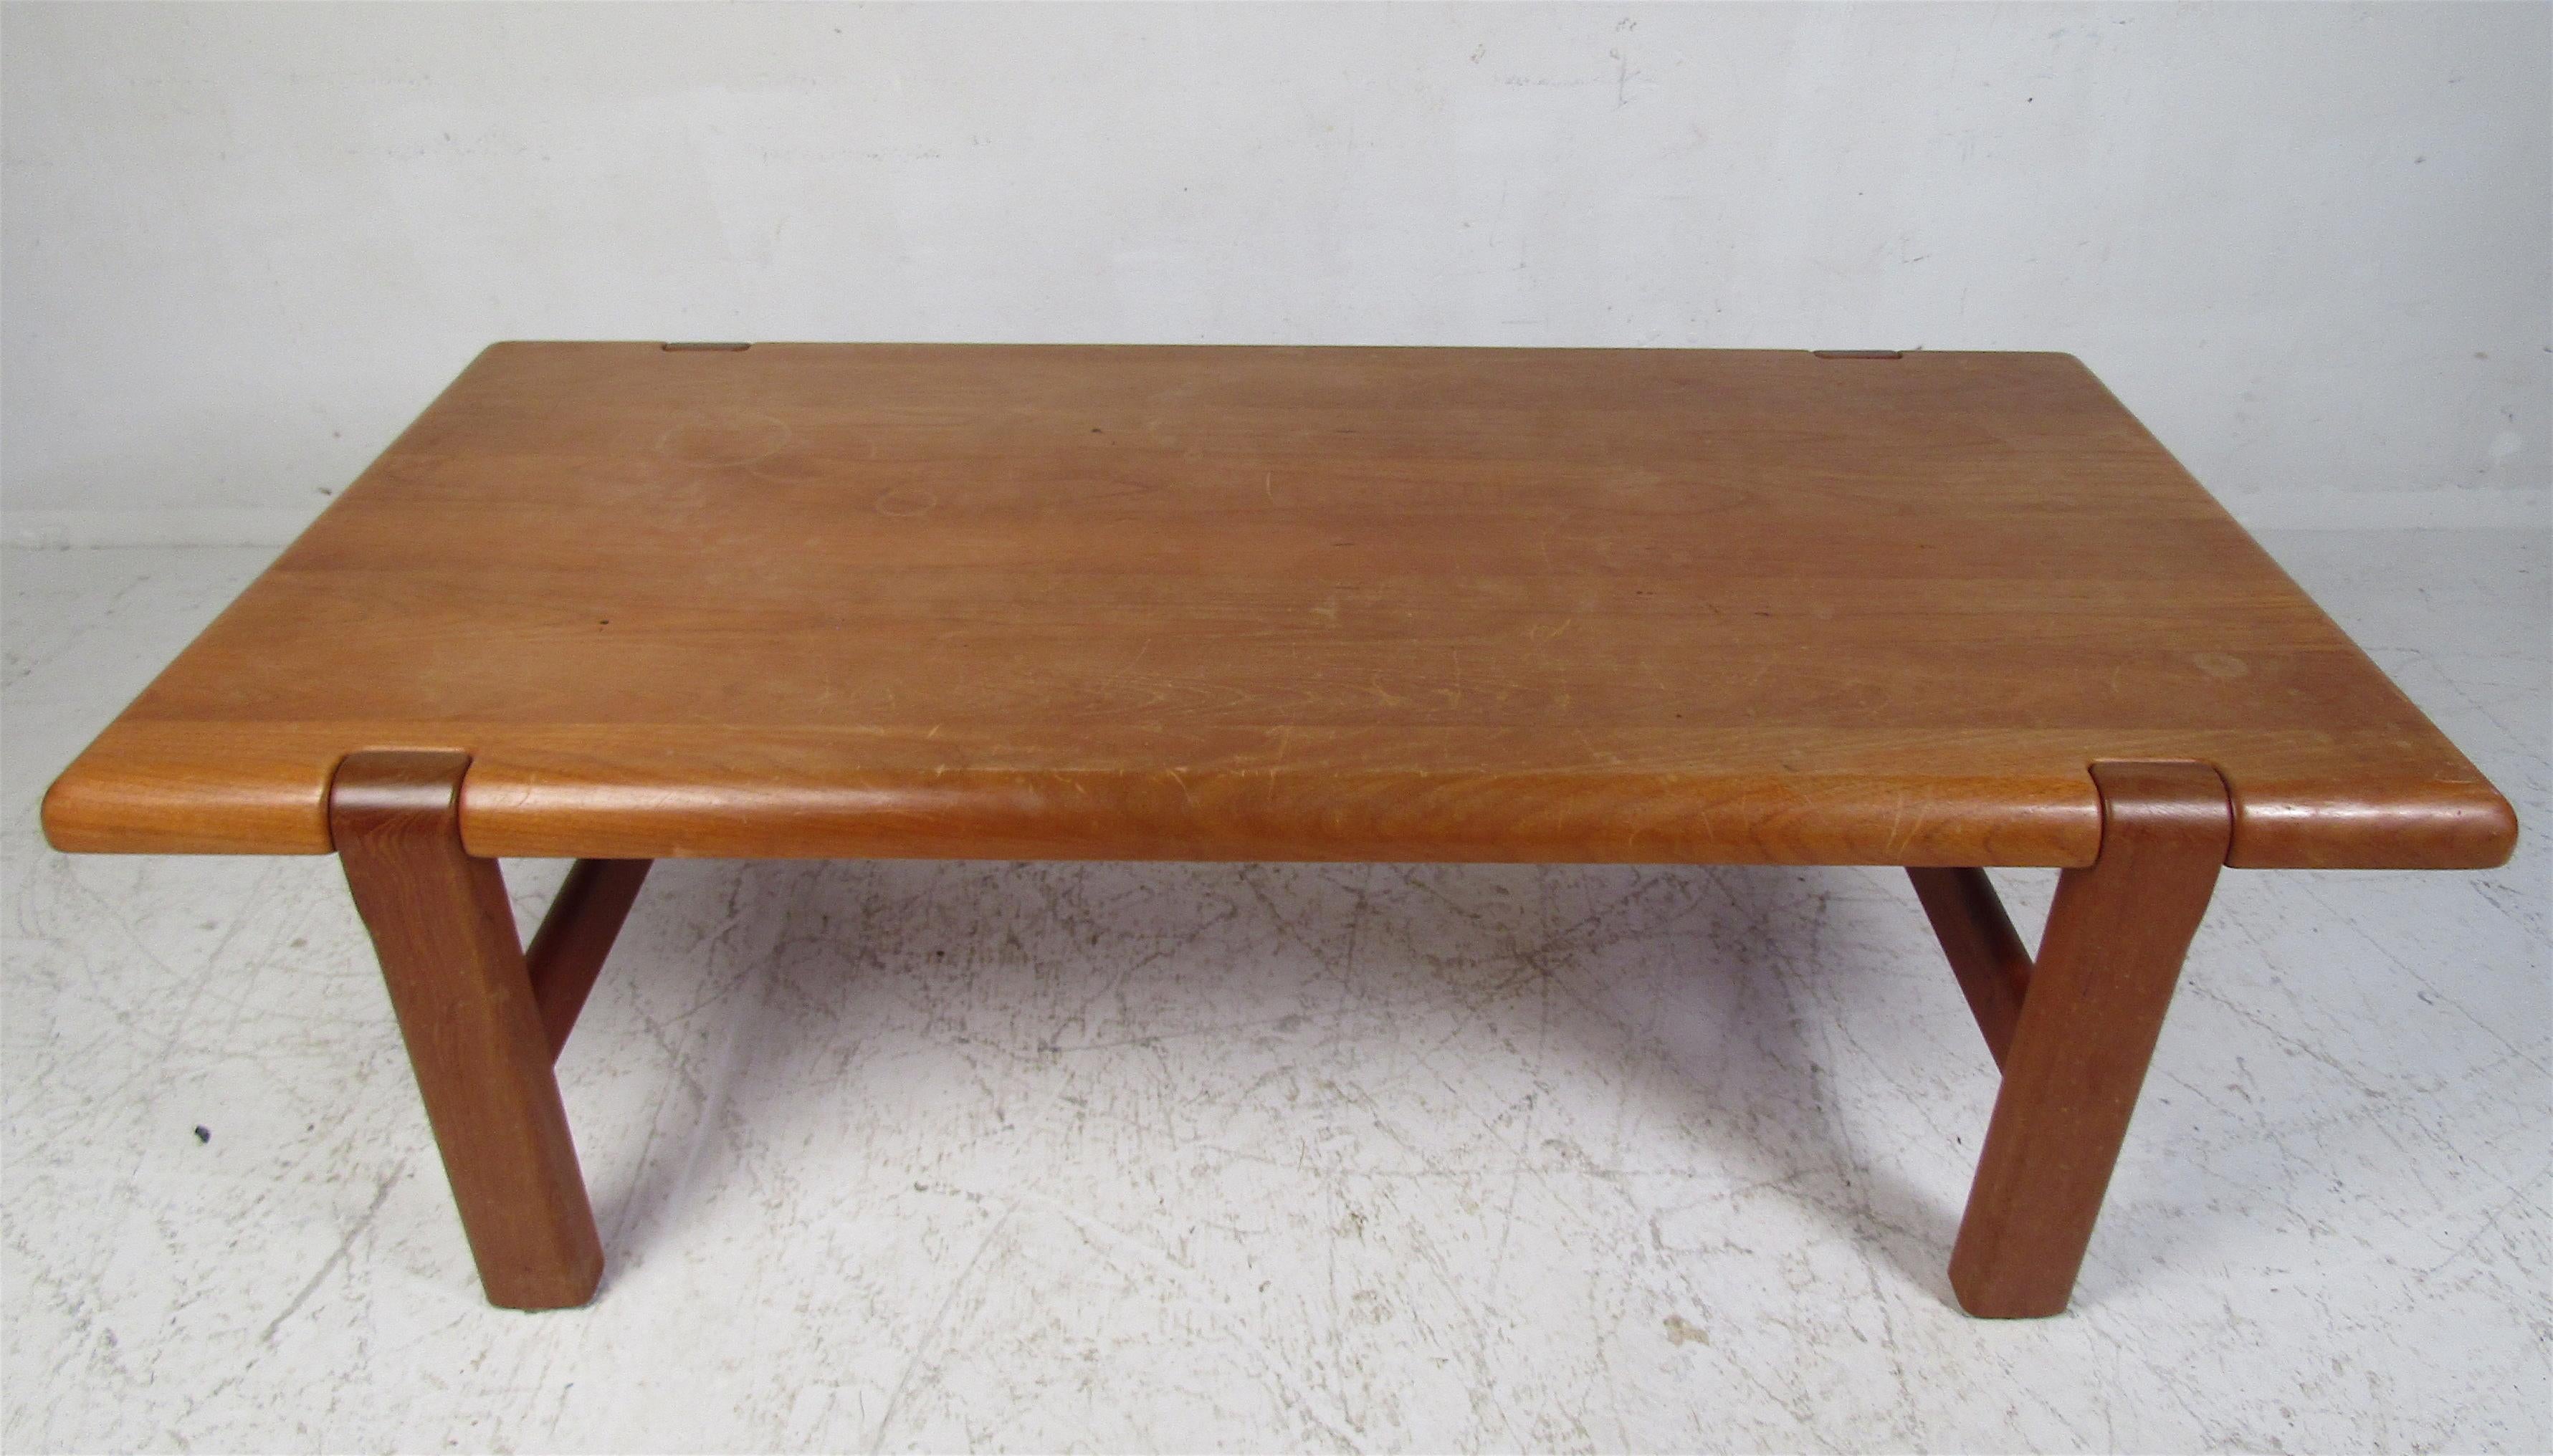 A Mid-Century Modern coffee table by Niels Back. Sleek design with a rich teak finish. Stylish and sturdy centerpiece for any setting. Please confirm item location (NY or NJ).